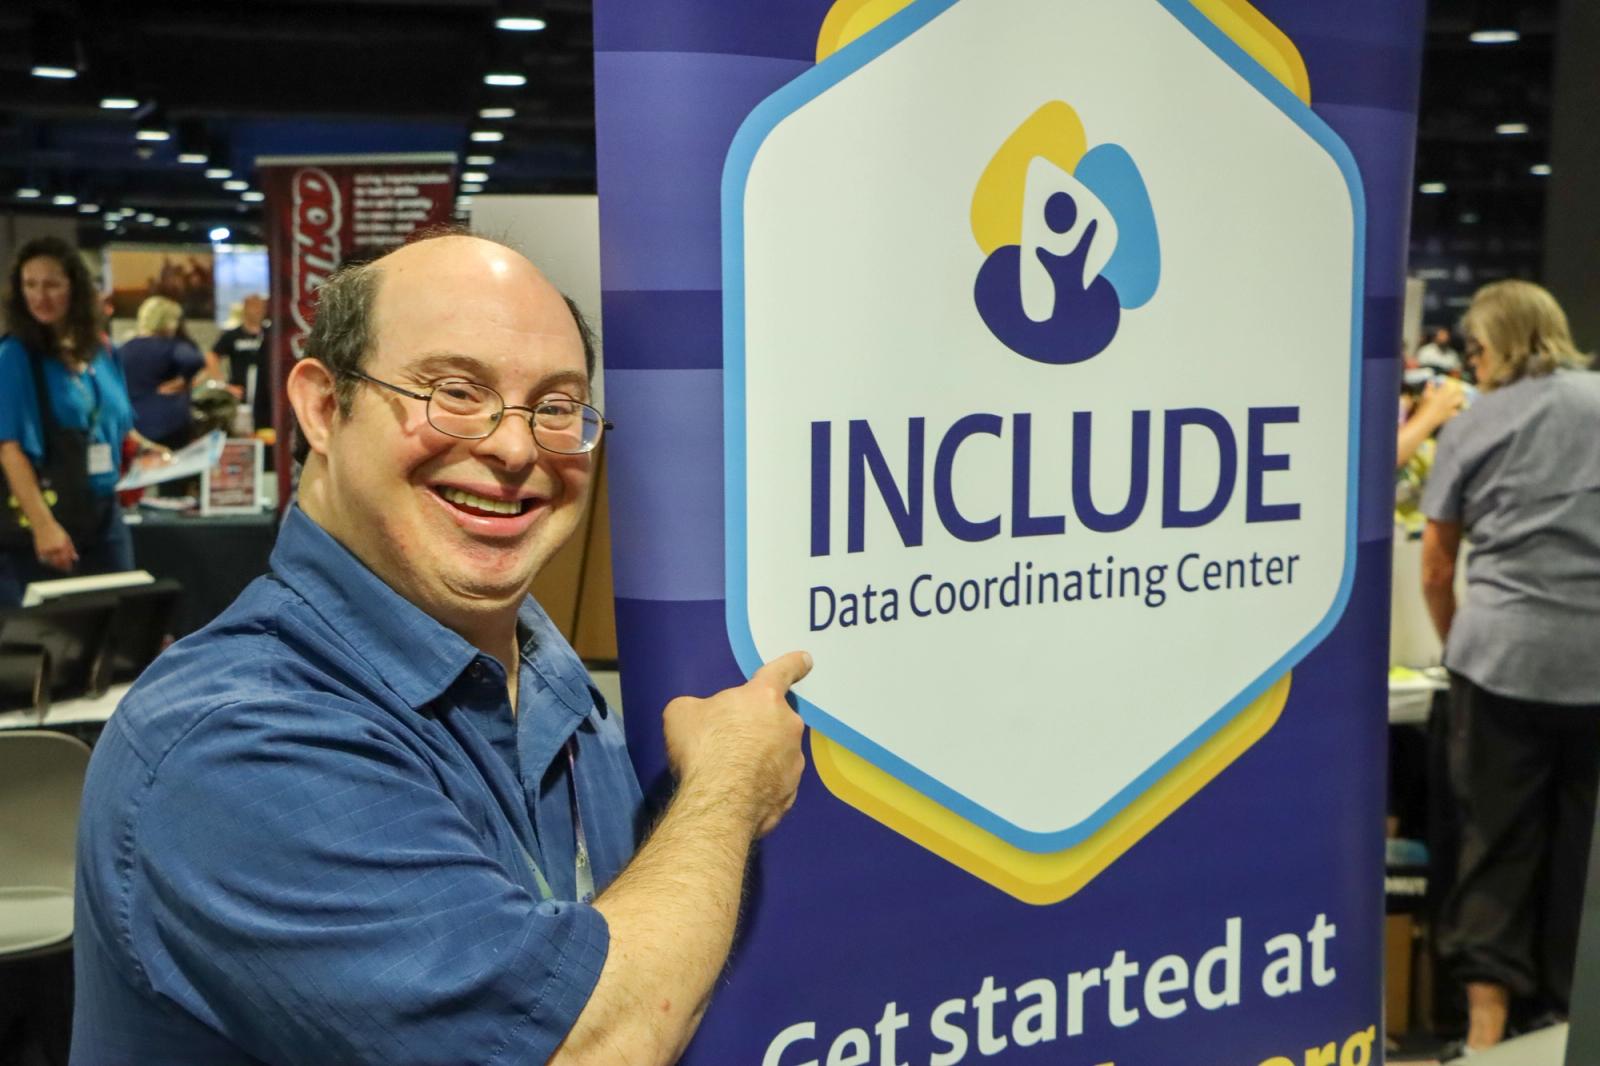 Self-advocate standing beside and pointing to the INCLUDE DCC banner